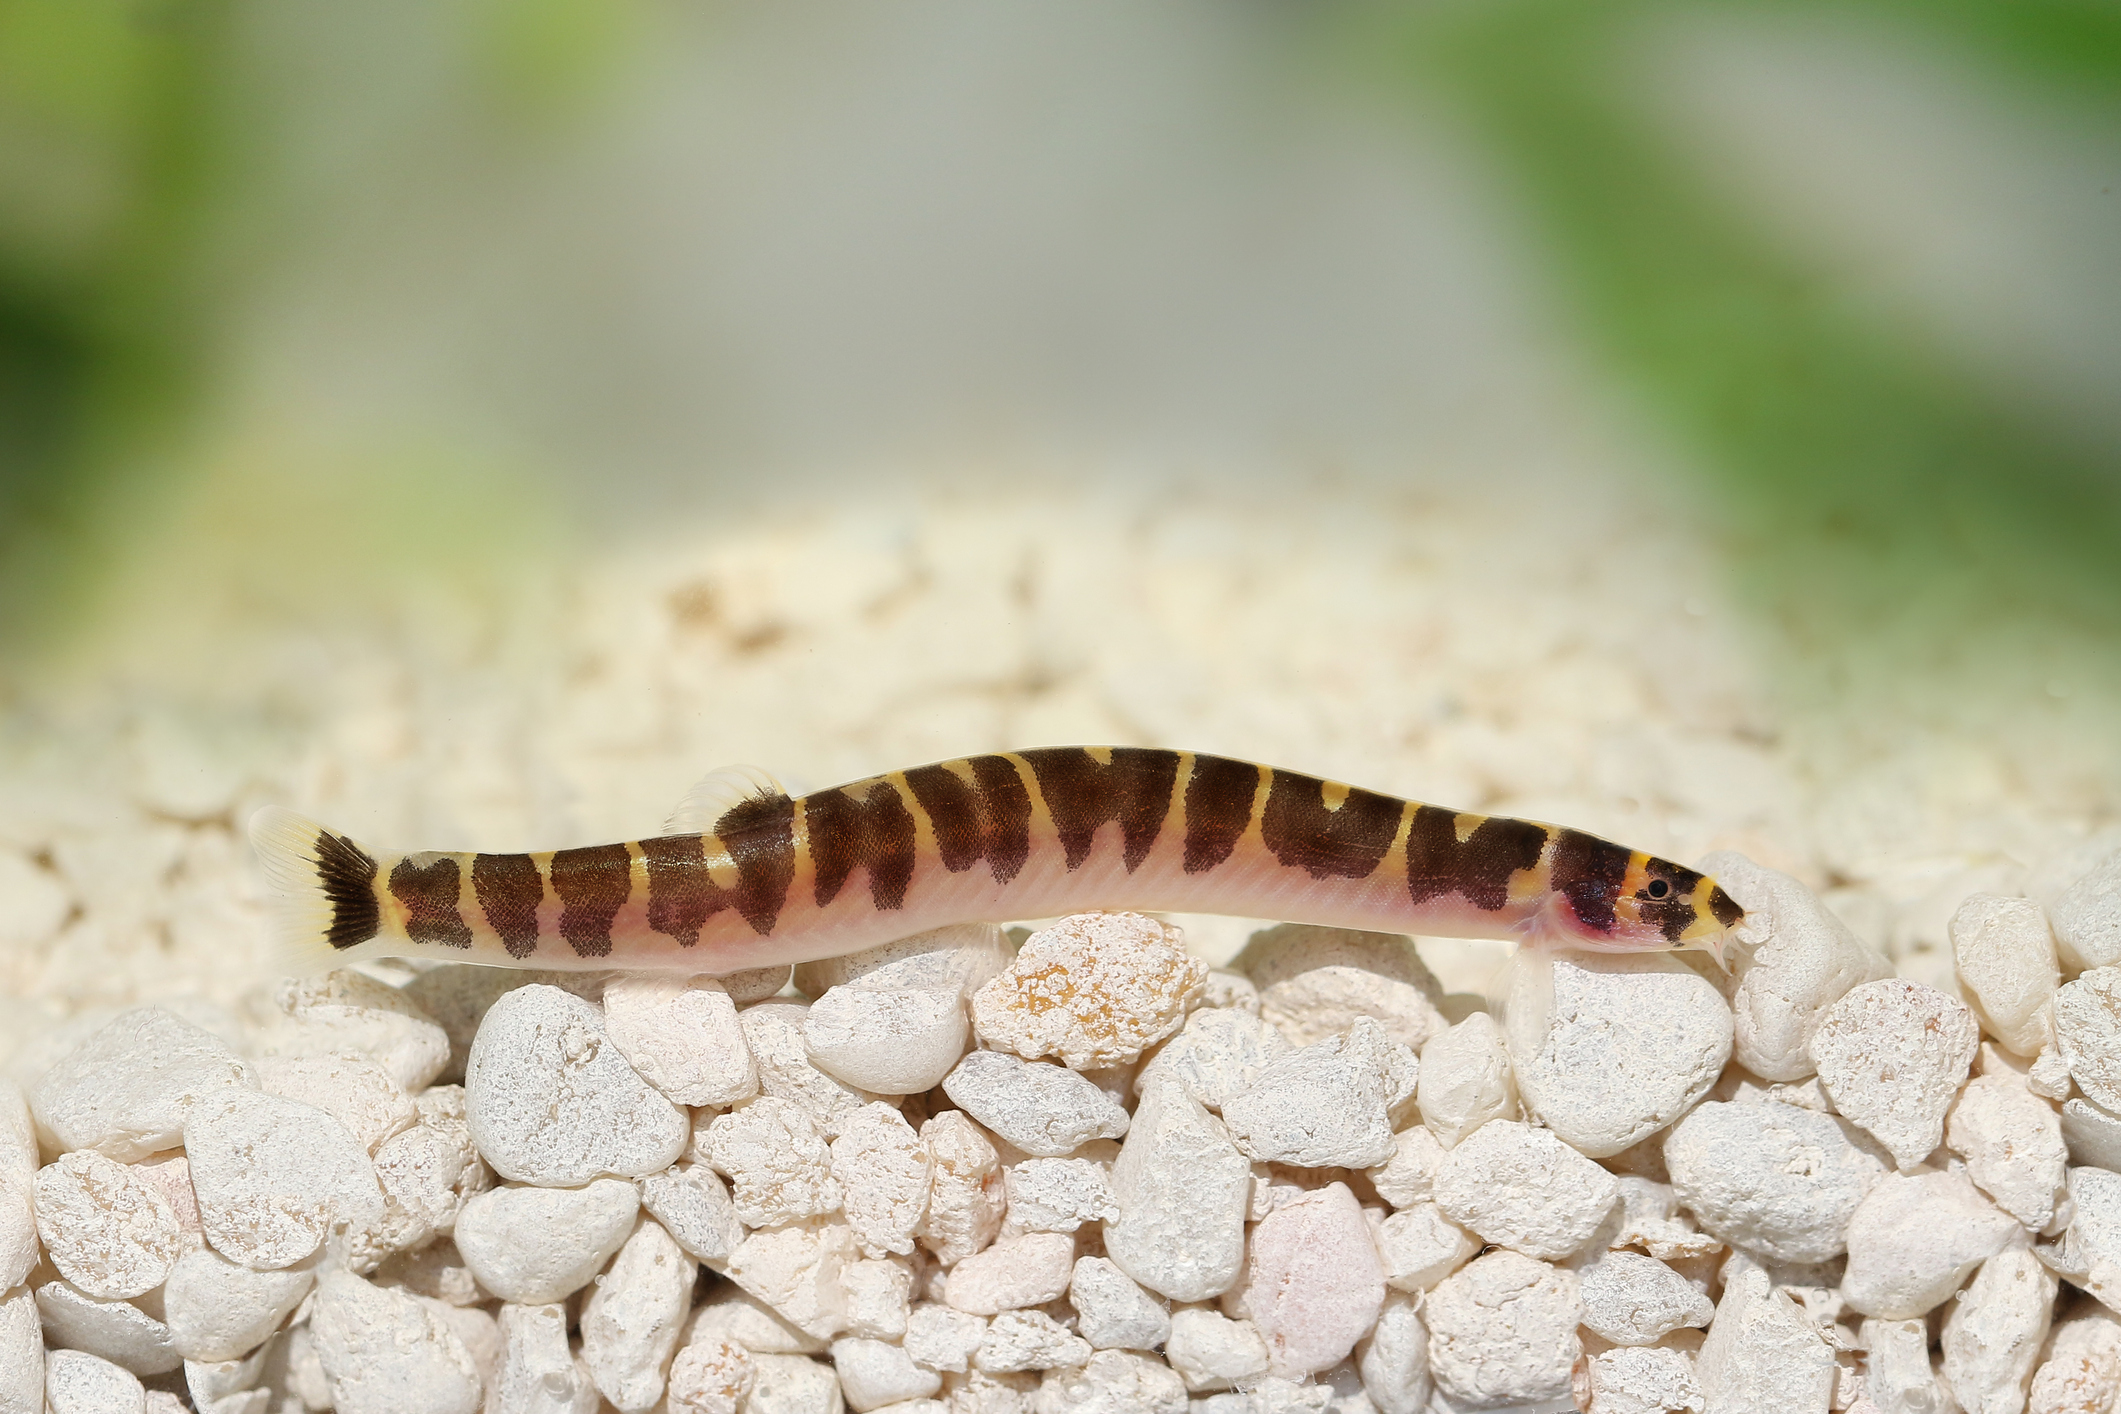 <p>  Kuhli loaches are tiny little eel-like freshwater fishies that wiggle around and hide among the nooks and crannies of your tank, but they won't eat other fish. They're the adventurers of the tank, always burrowing and checking out every corner. </p> <p>  Plus, they're like the unsung heroes of the tank — helping keep things clean by munching on any leftover food. They're pretty chill and low-maintenance, which is a win for both newbie and seasoned fish keepers. </p>